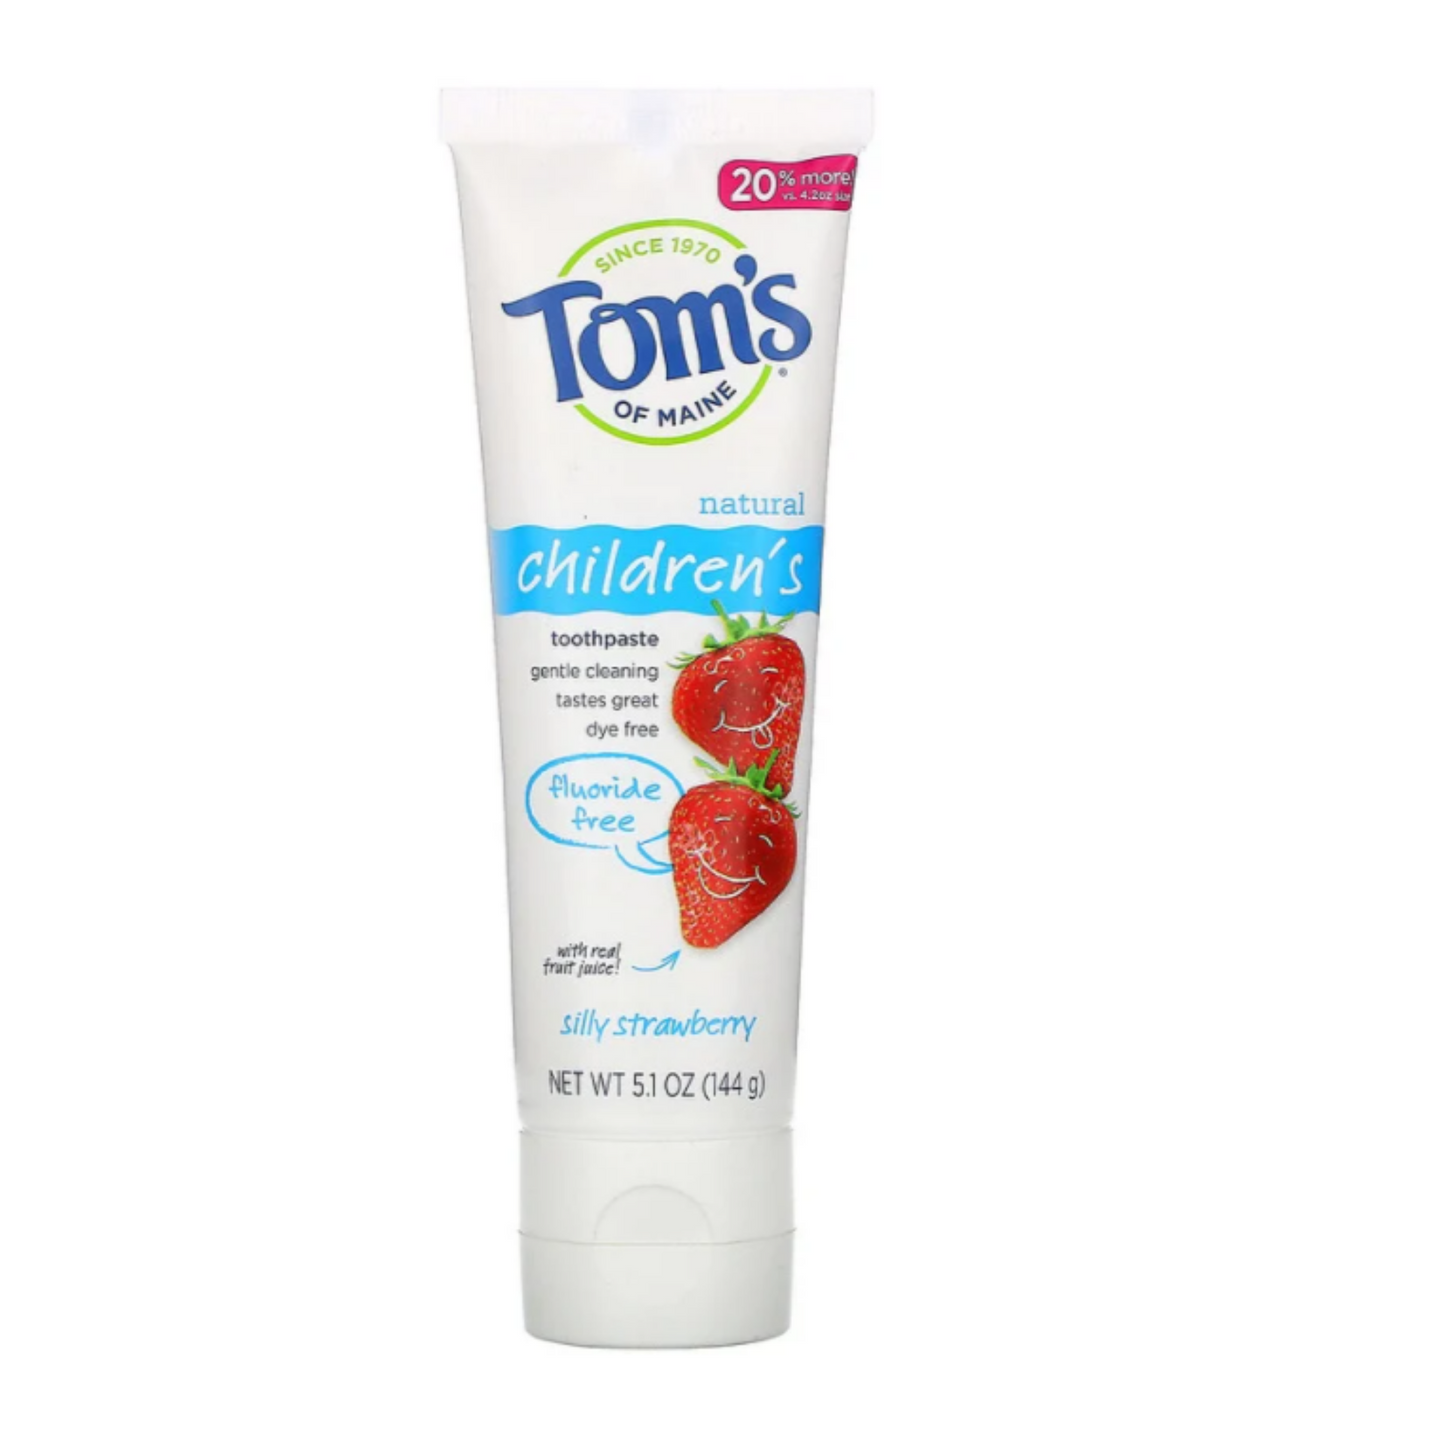 Primary image of Children's Silly Strawberry Toothpaste